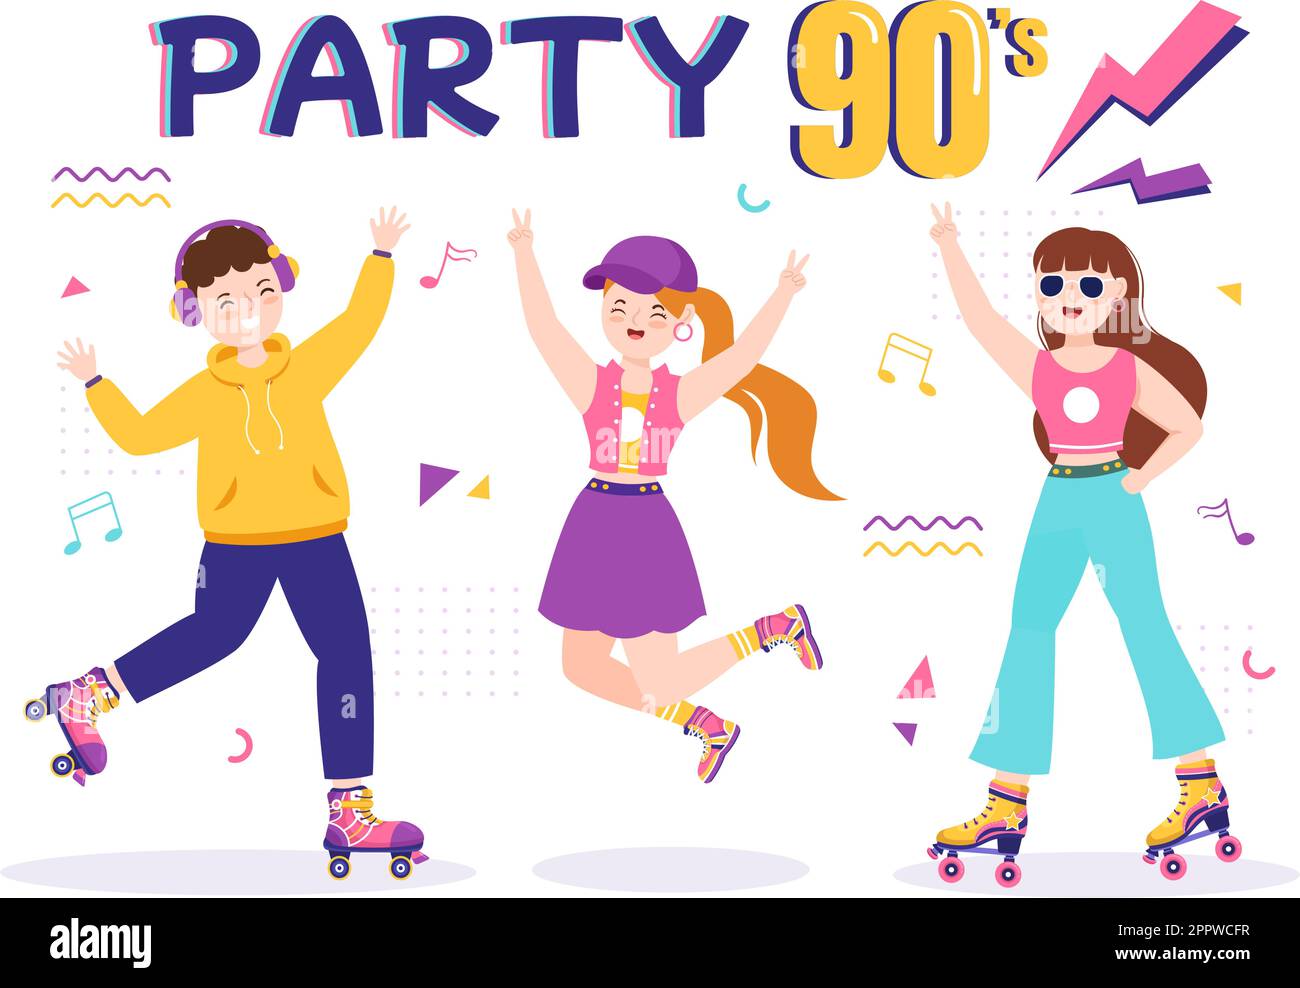 90s Retro Party Cartoon Background Illustration with Music, Sneakers, Radio and People of Dancing Time in Trendy Flat Style Design Stock Vector